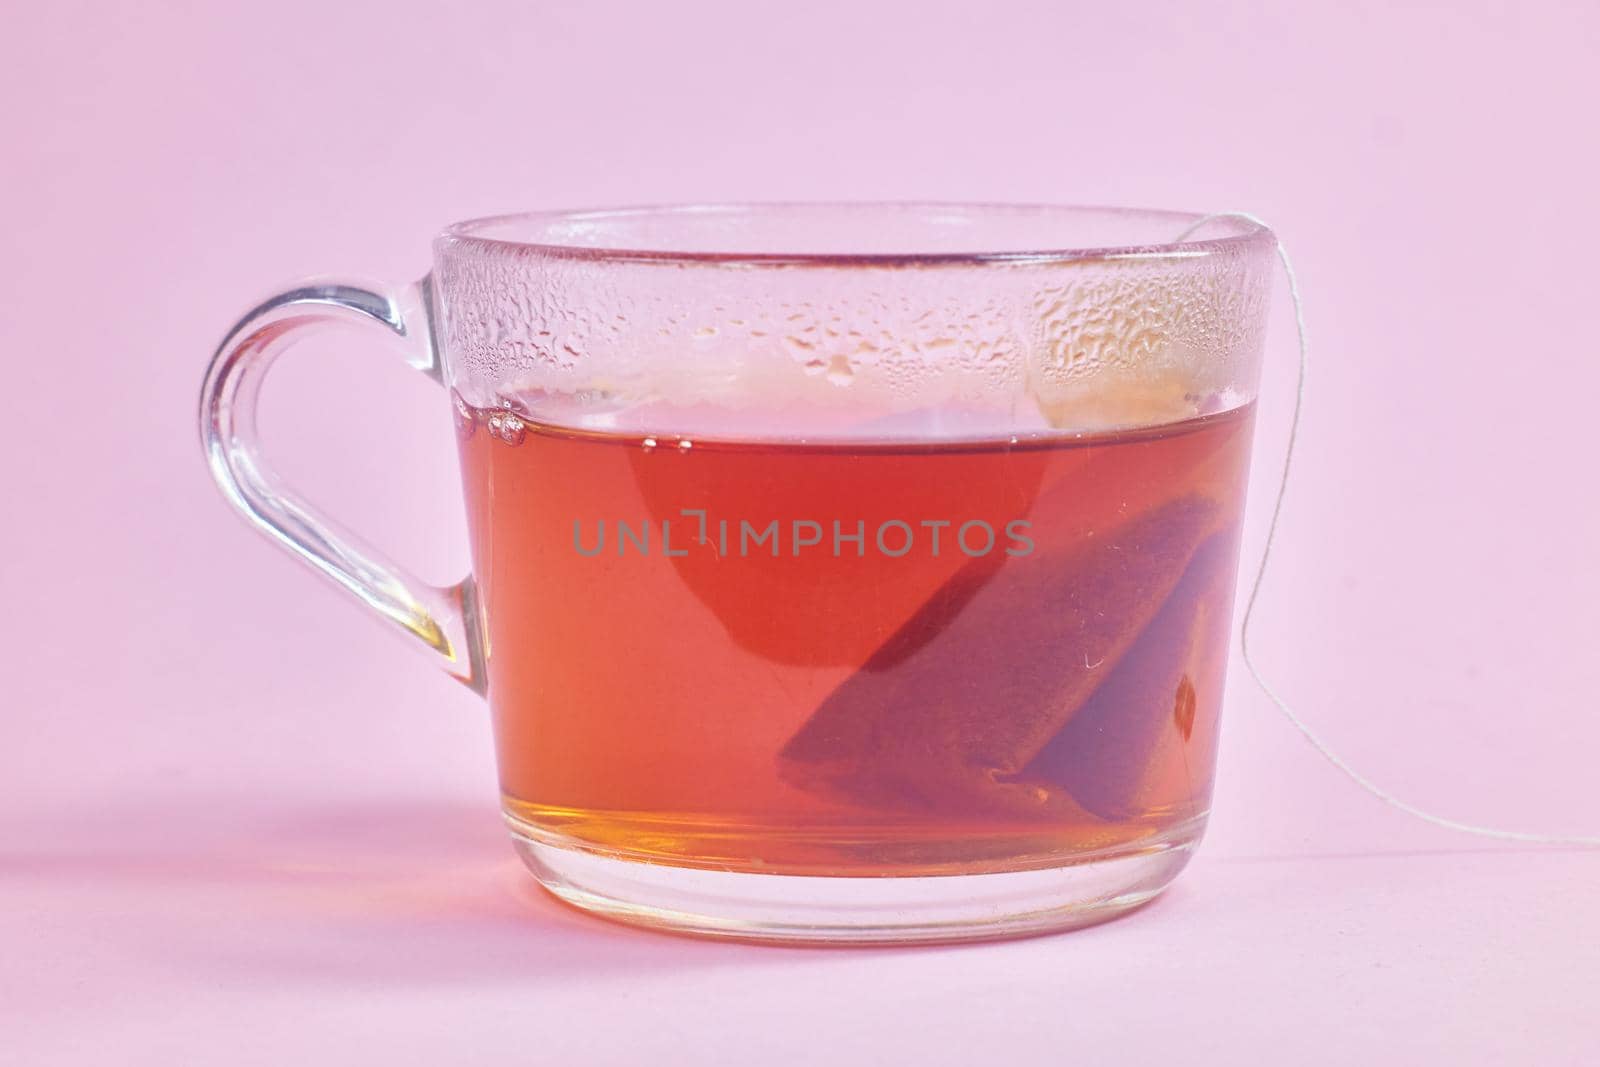 the tea bag is brewed in a transparent glass cup on a pink background.